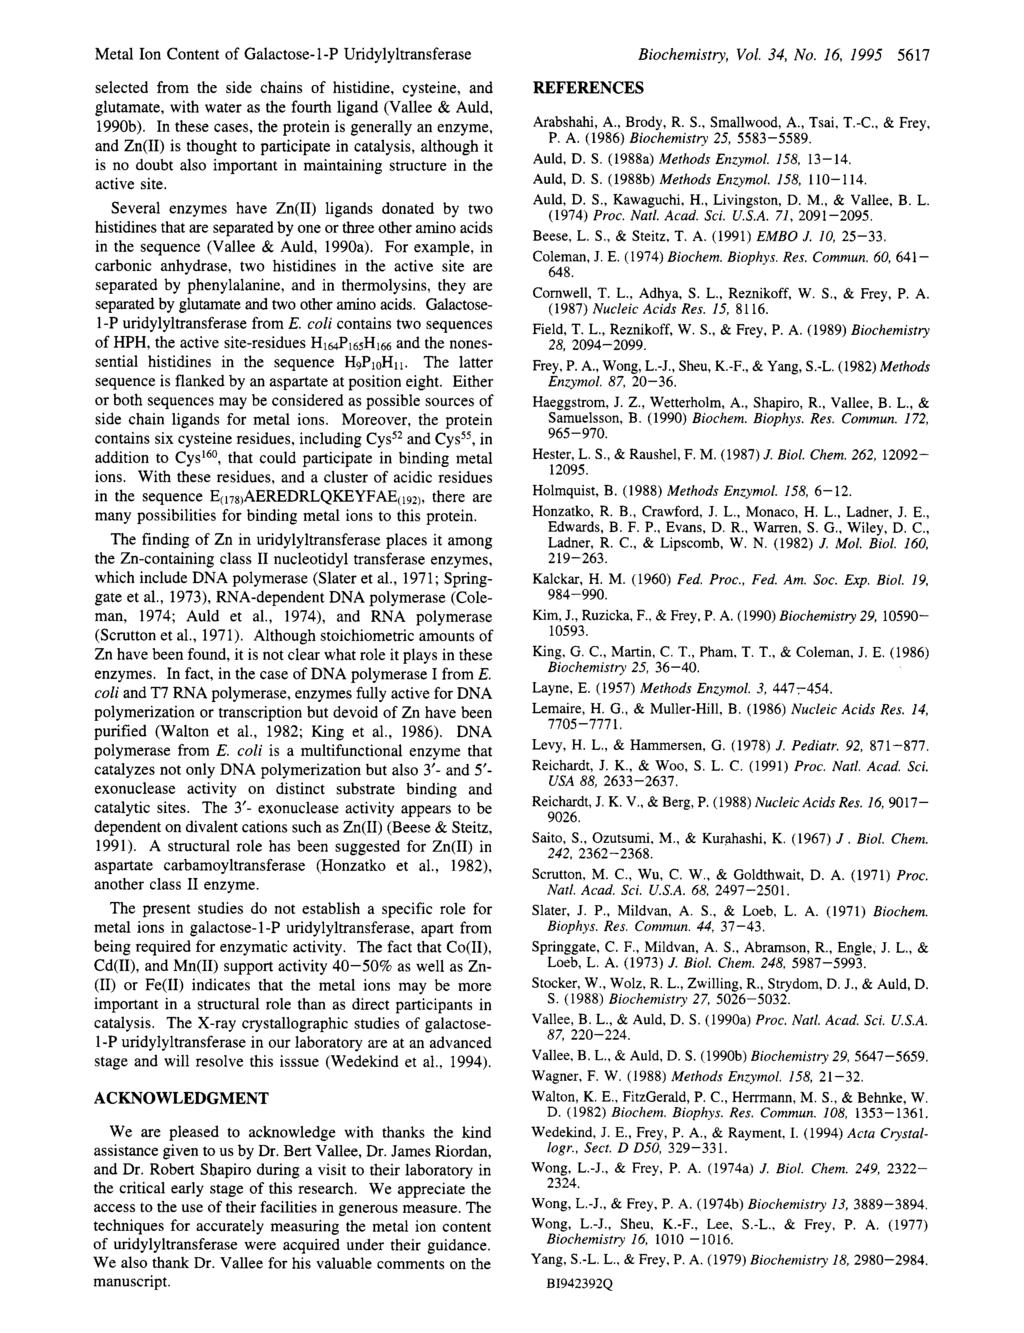 Metal Ion Content of Galactose- I-P ridylyltransferase selected from te side cains of istidine, cysteine, and glutamate, wit water as te fourt ligand (Vallee & Auld, 1990b).